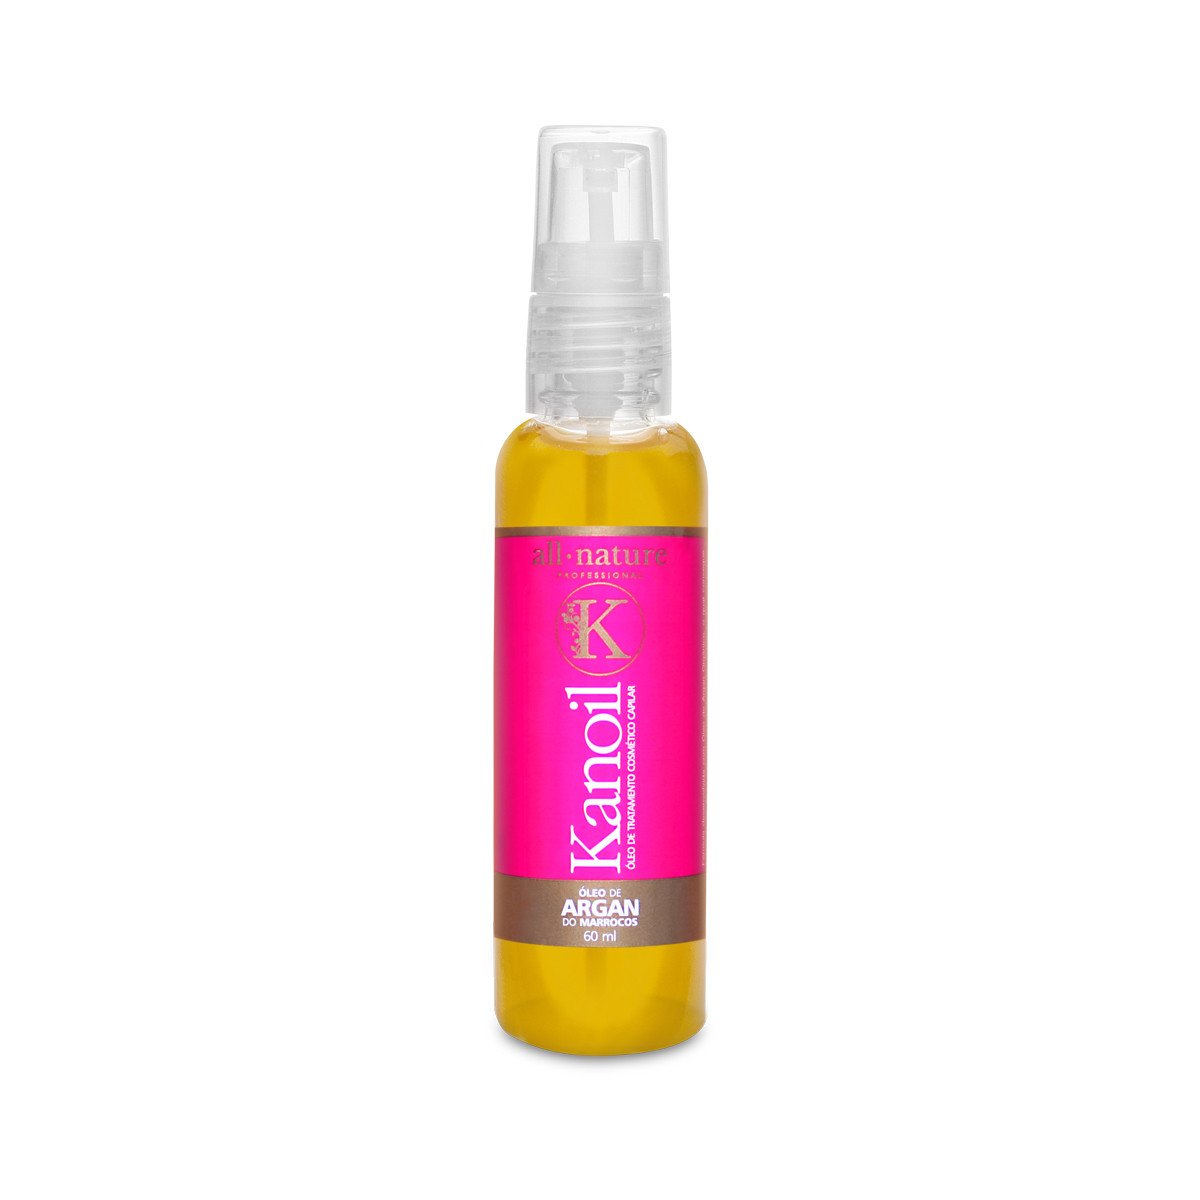 All Nature Home Care Kanoil Organic Argan Oil Silicones Leave-In Treatment Finisher 60ml - All Nature